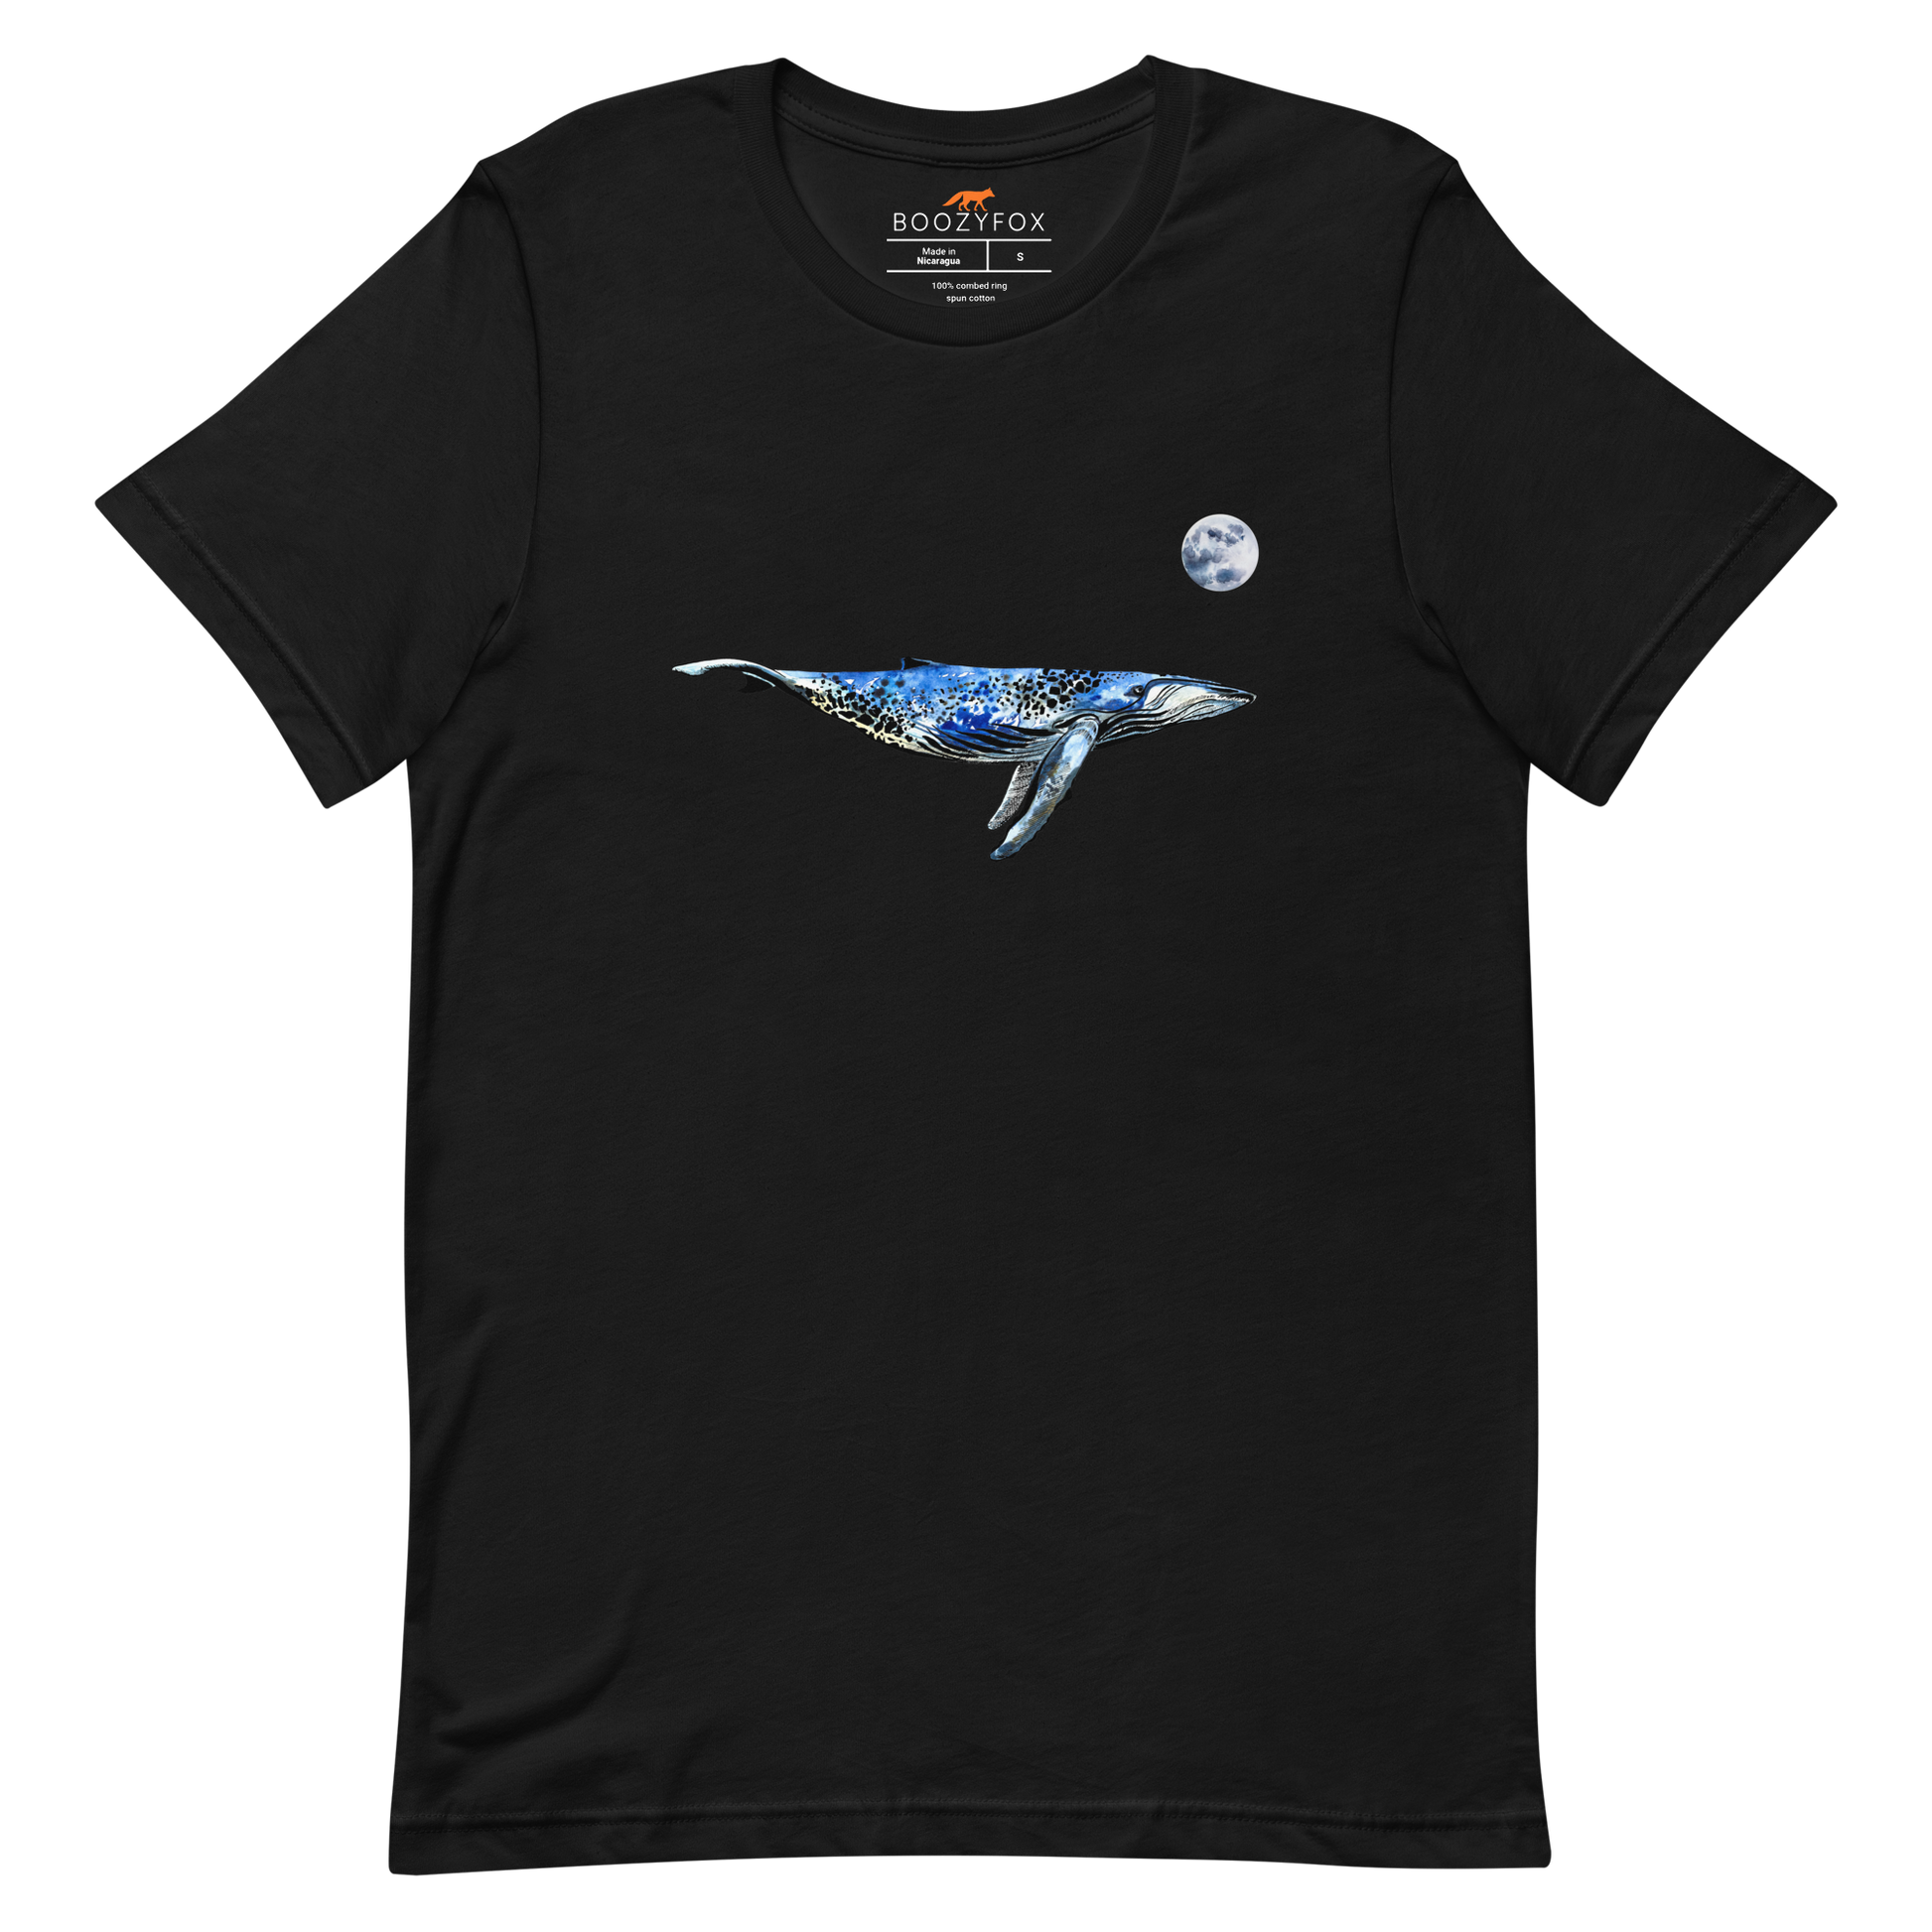 Black Premium Whale T-Shirt featuring majestic Whale Under The Moon graphic on the chest - Cool Graphic Whale Tees - Boozy Fox